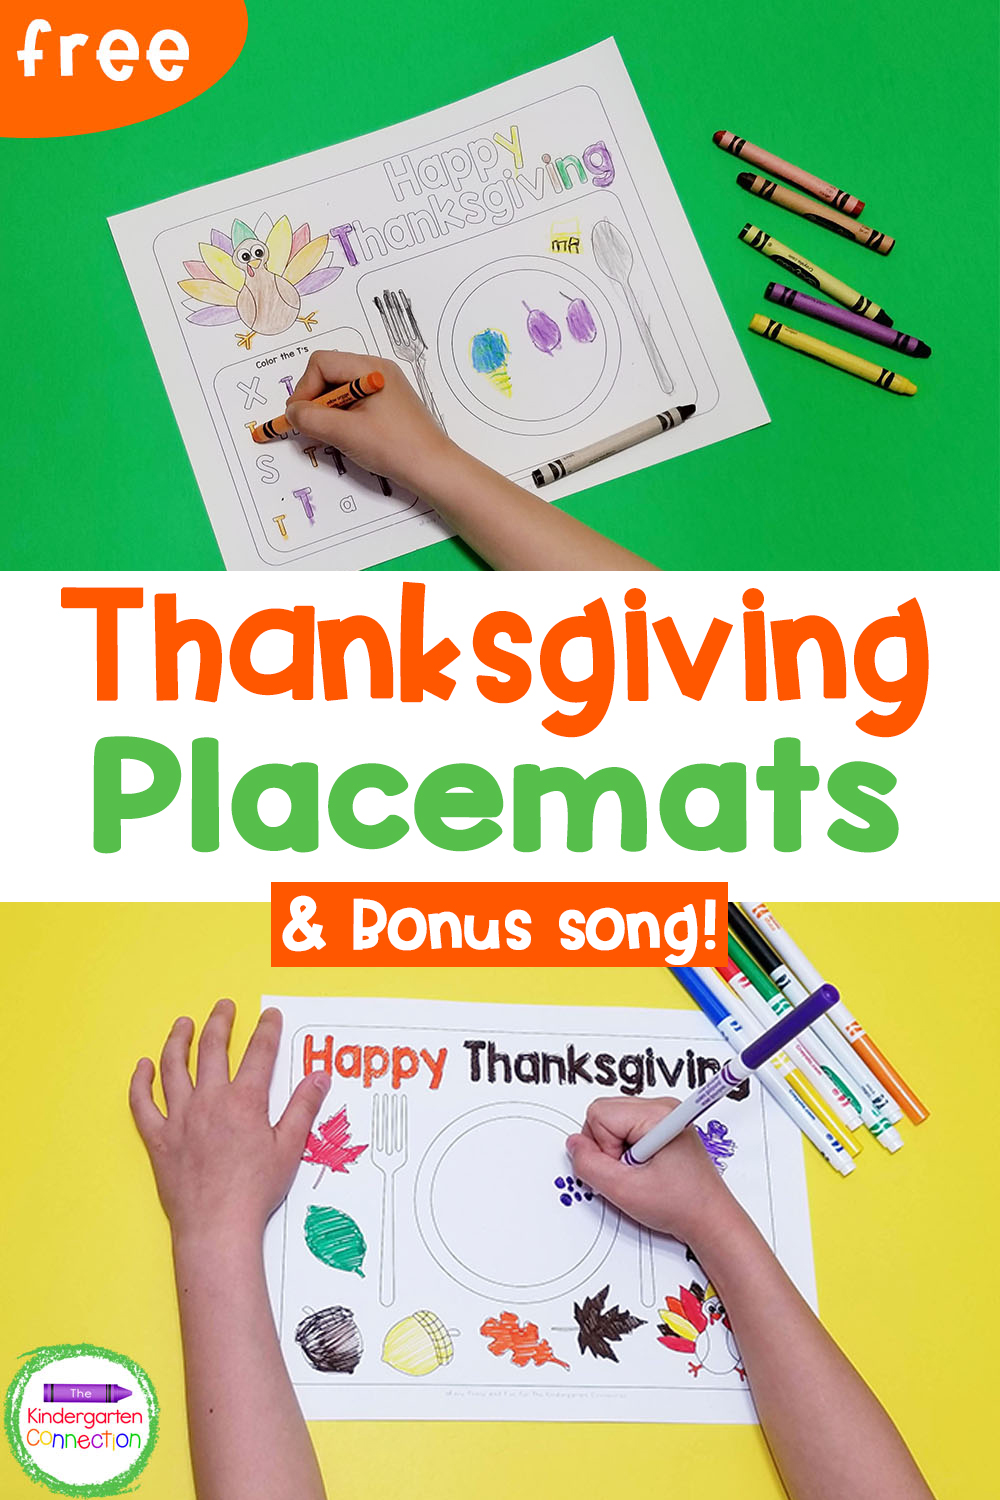 These FREE Printable Thanksgiving Placemats for kids will make your Thanksgiving meal at home or in the classroom extra special this year!